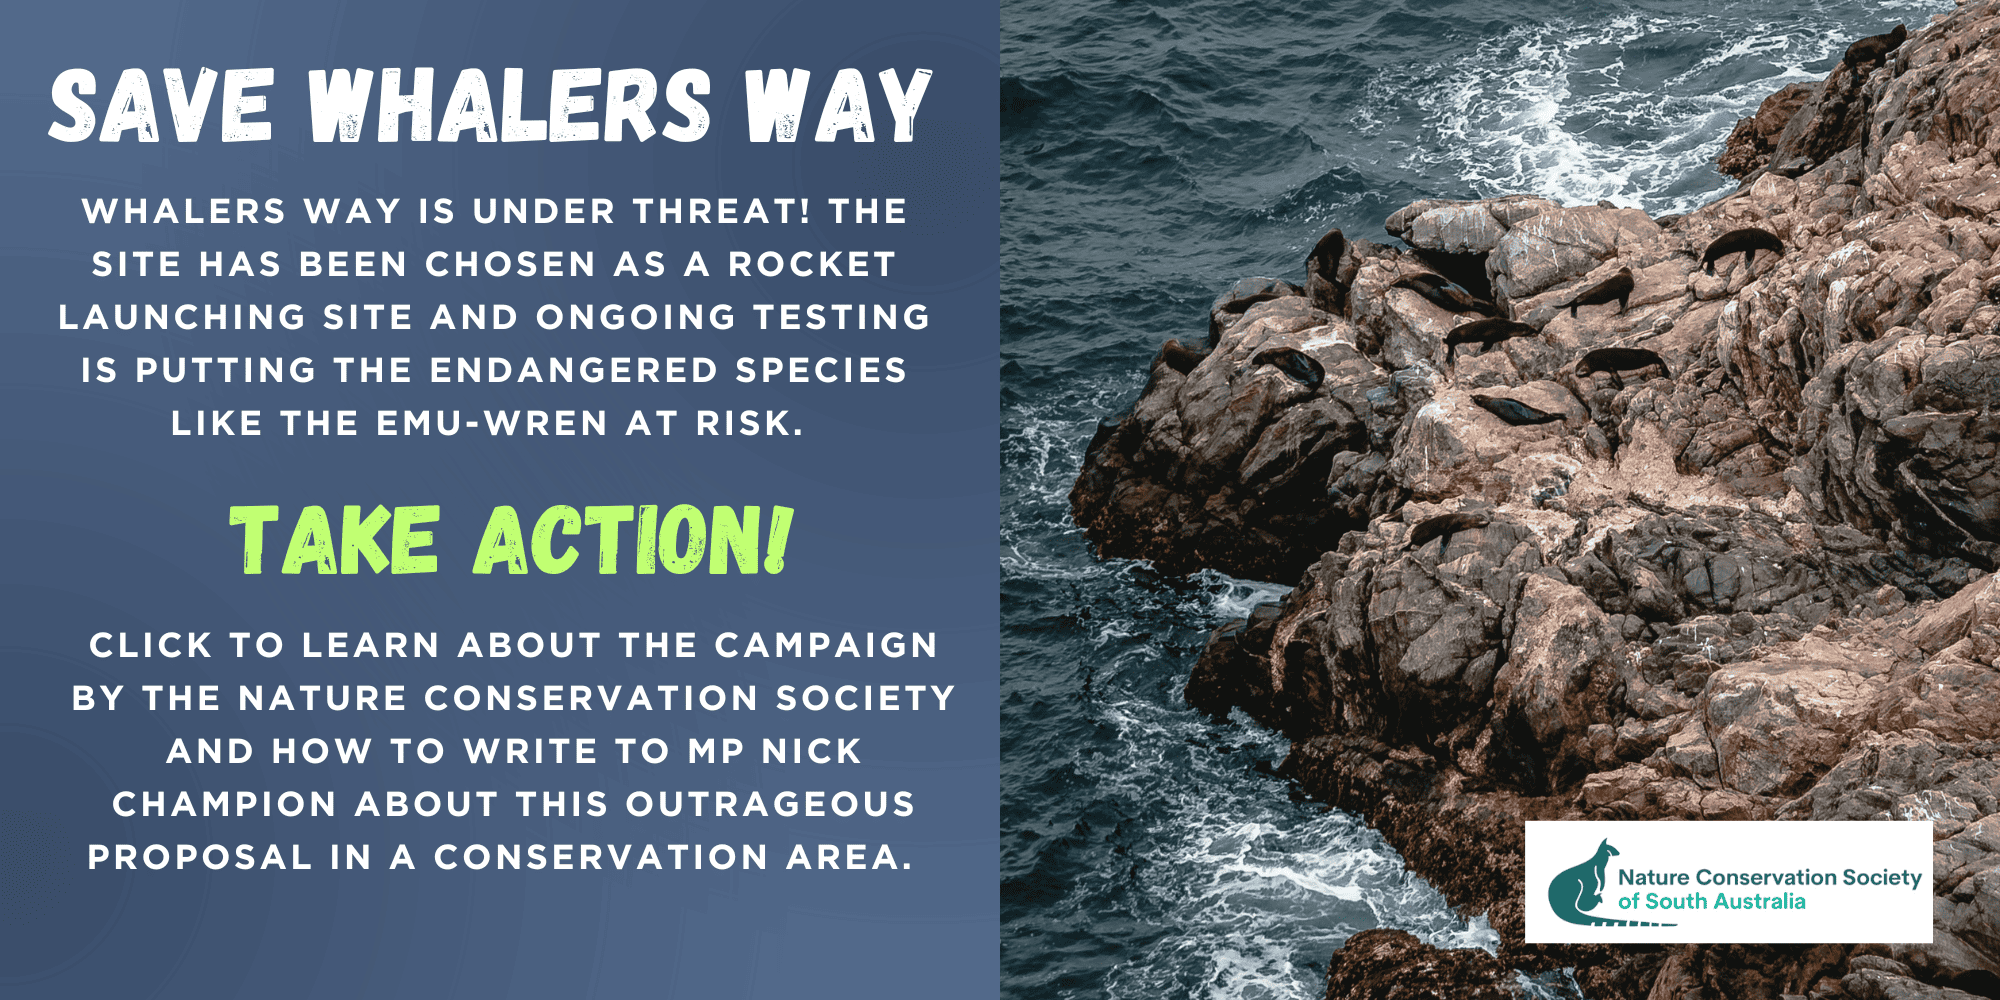 Save Whalers Way - Take Action to stop the rocket launch facility